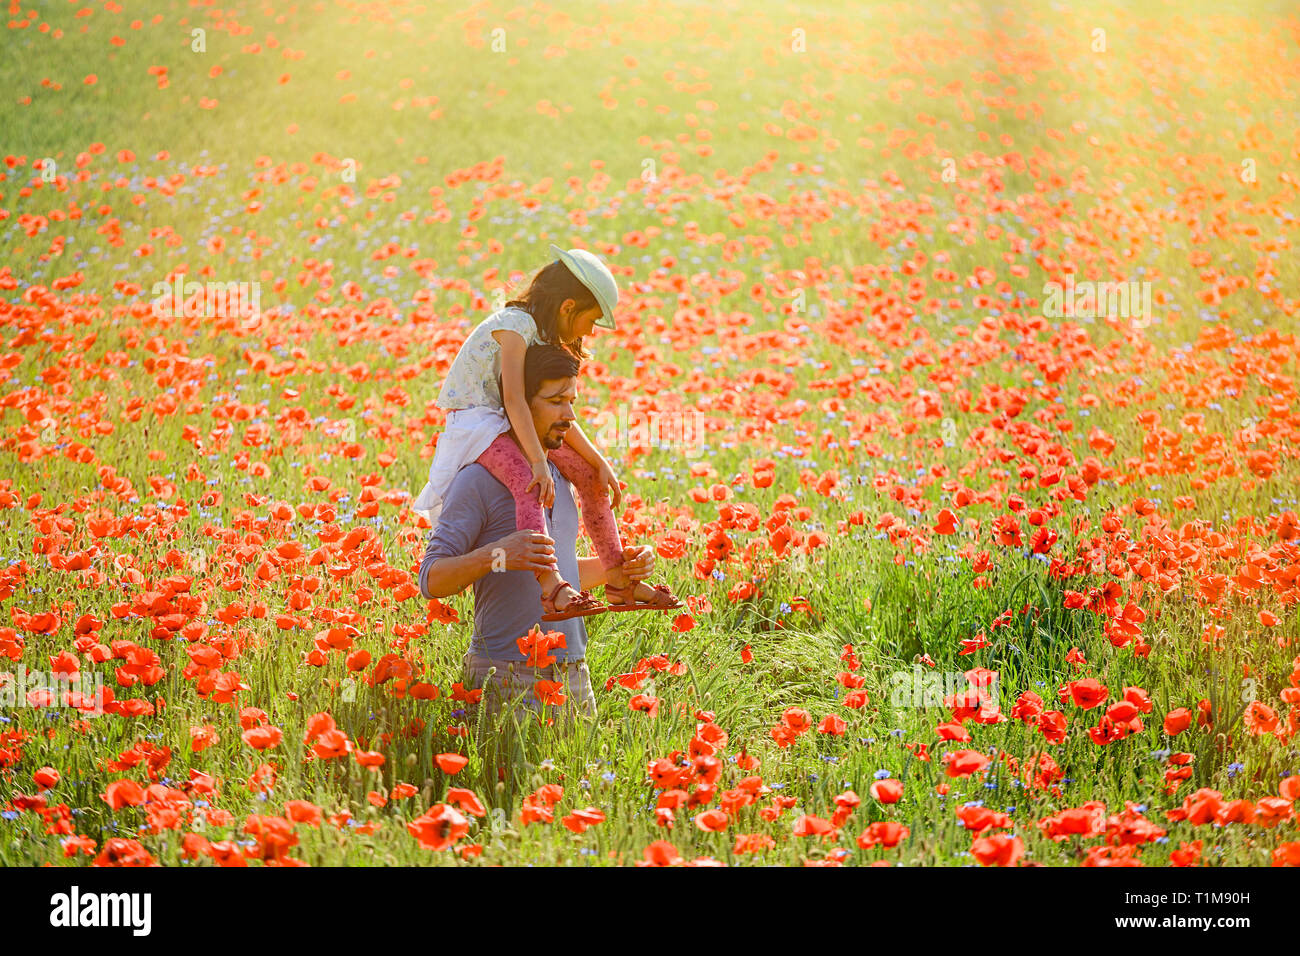 Father carrying daughter on shoulders in sunny idyllic rural field with red poppies Stock Photo